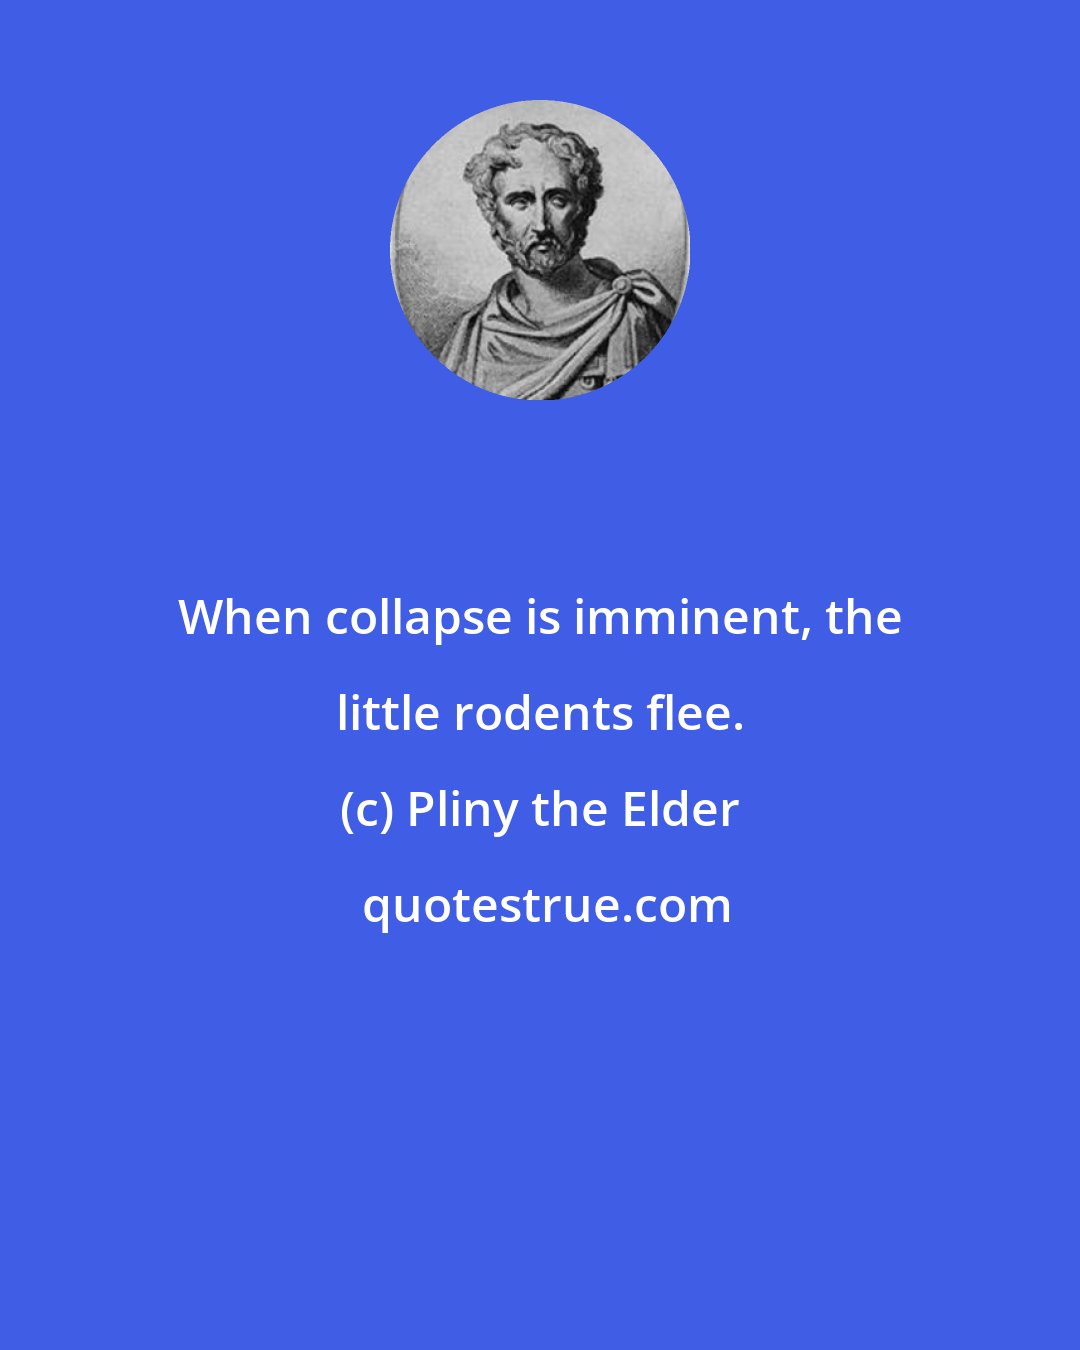 Pliny the Elder: When collapse is imminent, the little rodents flee.